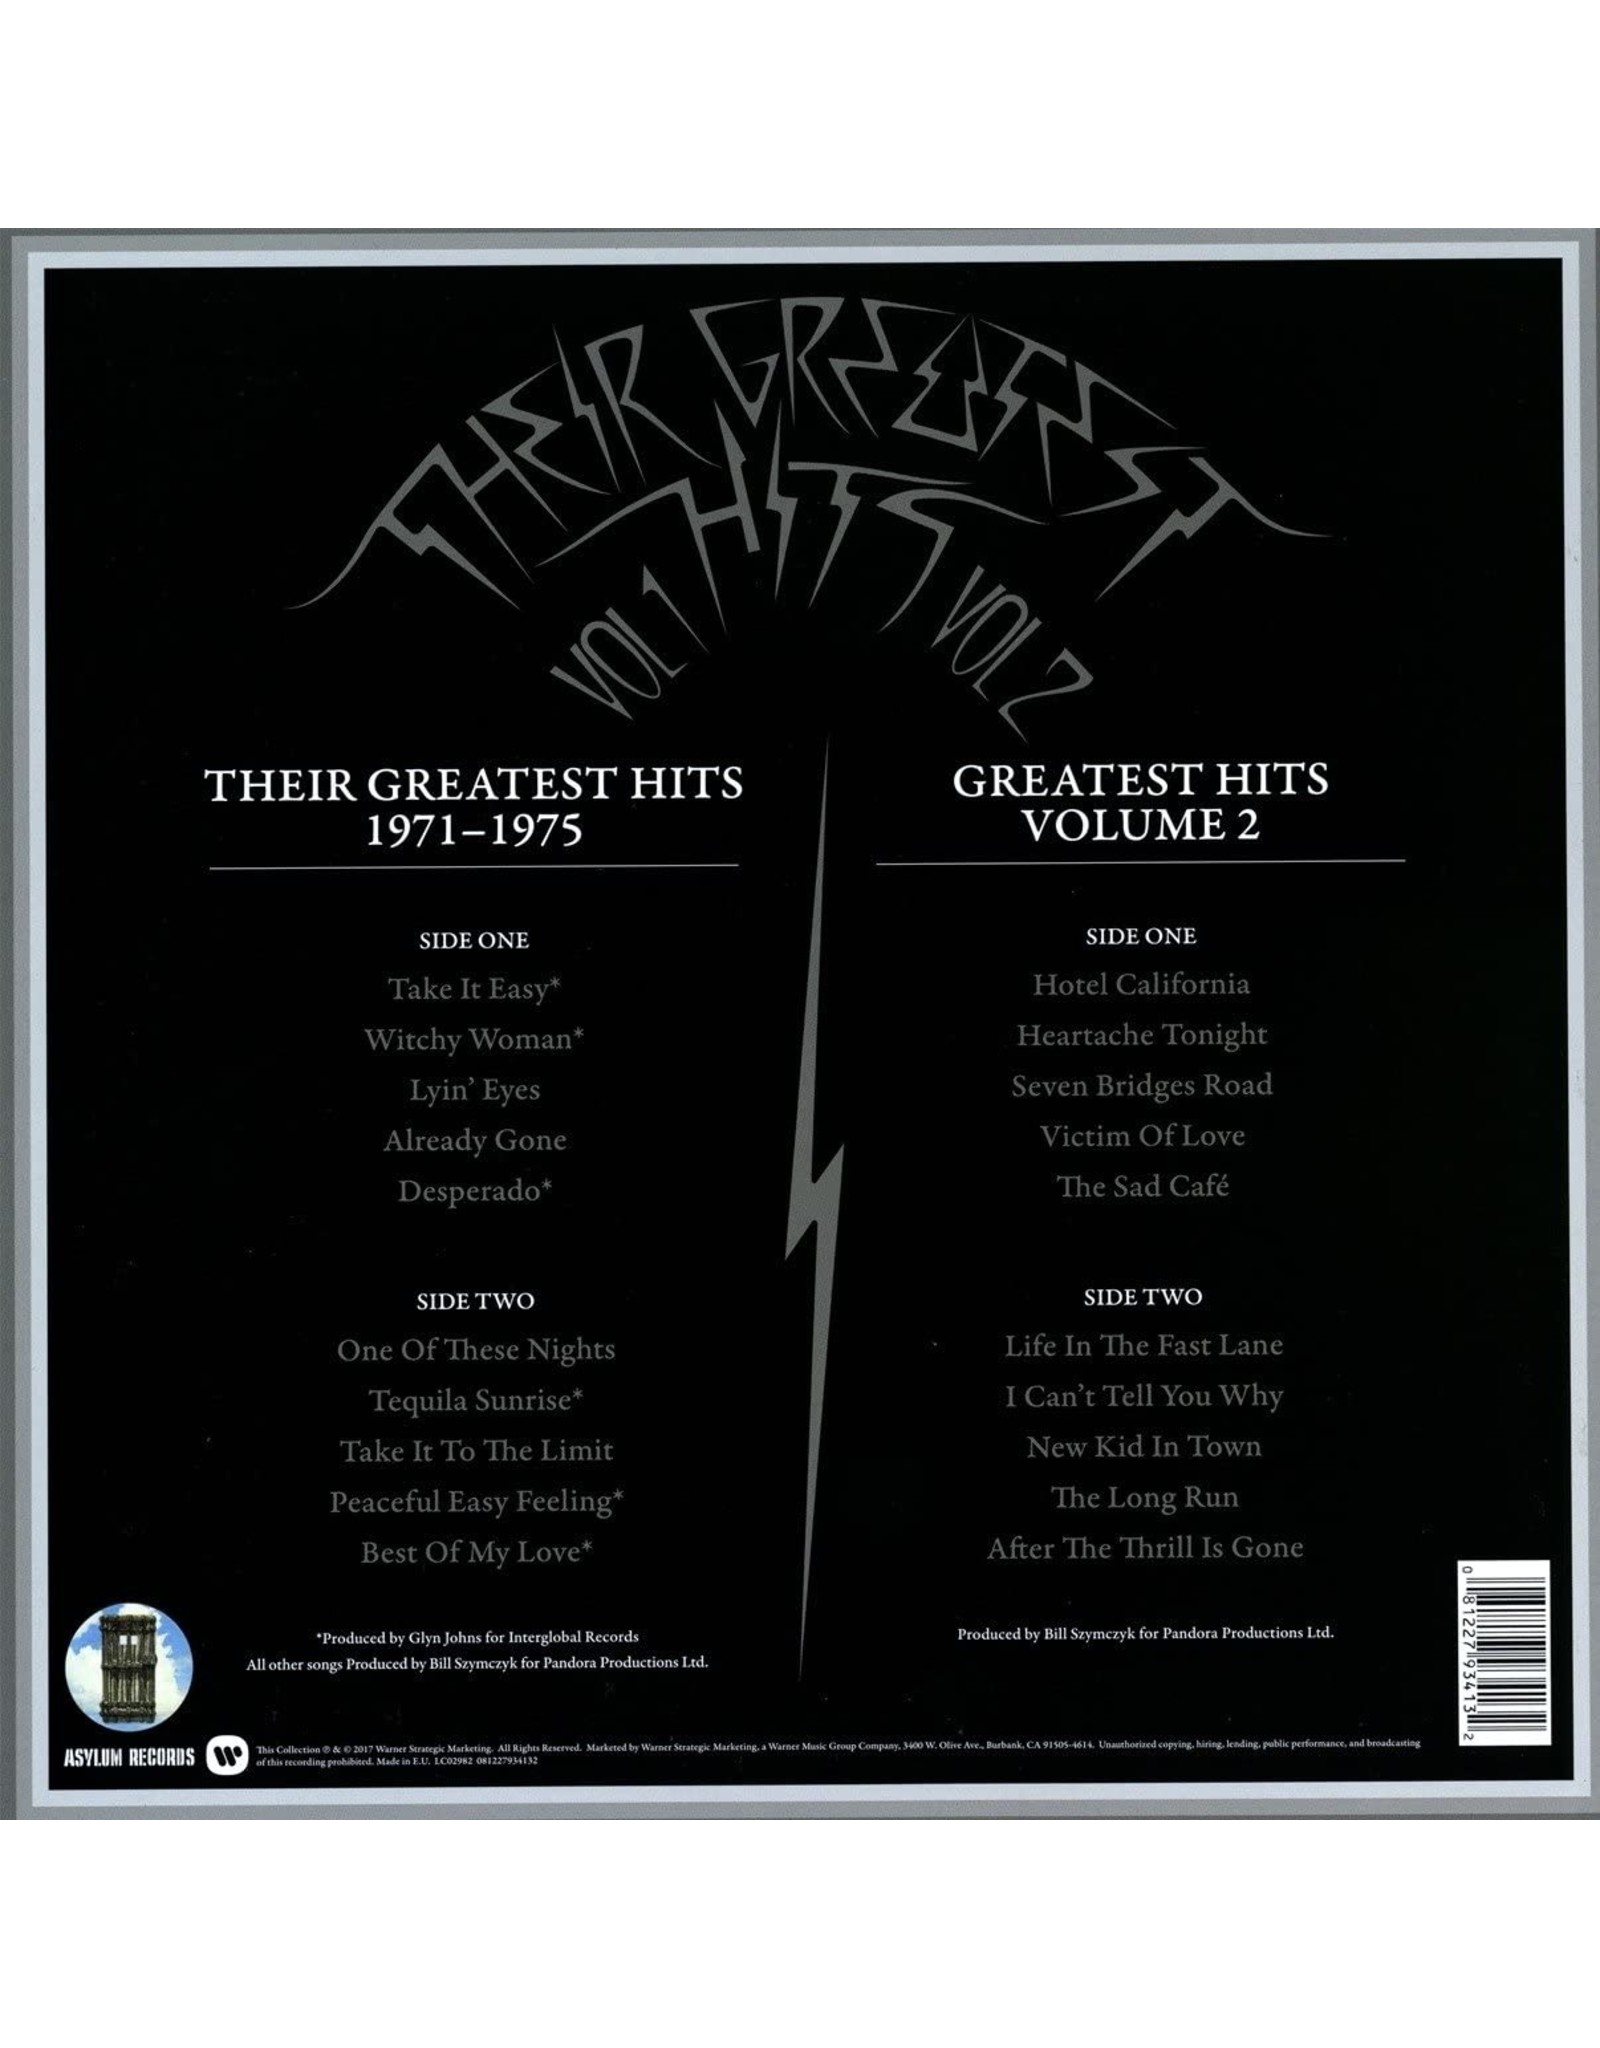 Eagles - Their Greatest Hits (Volumes 1 & 2)